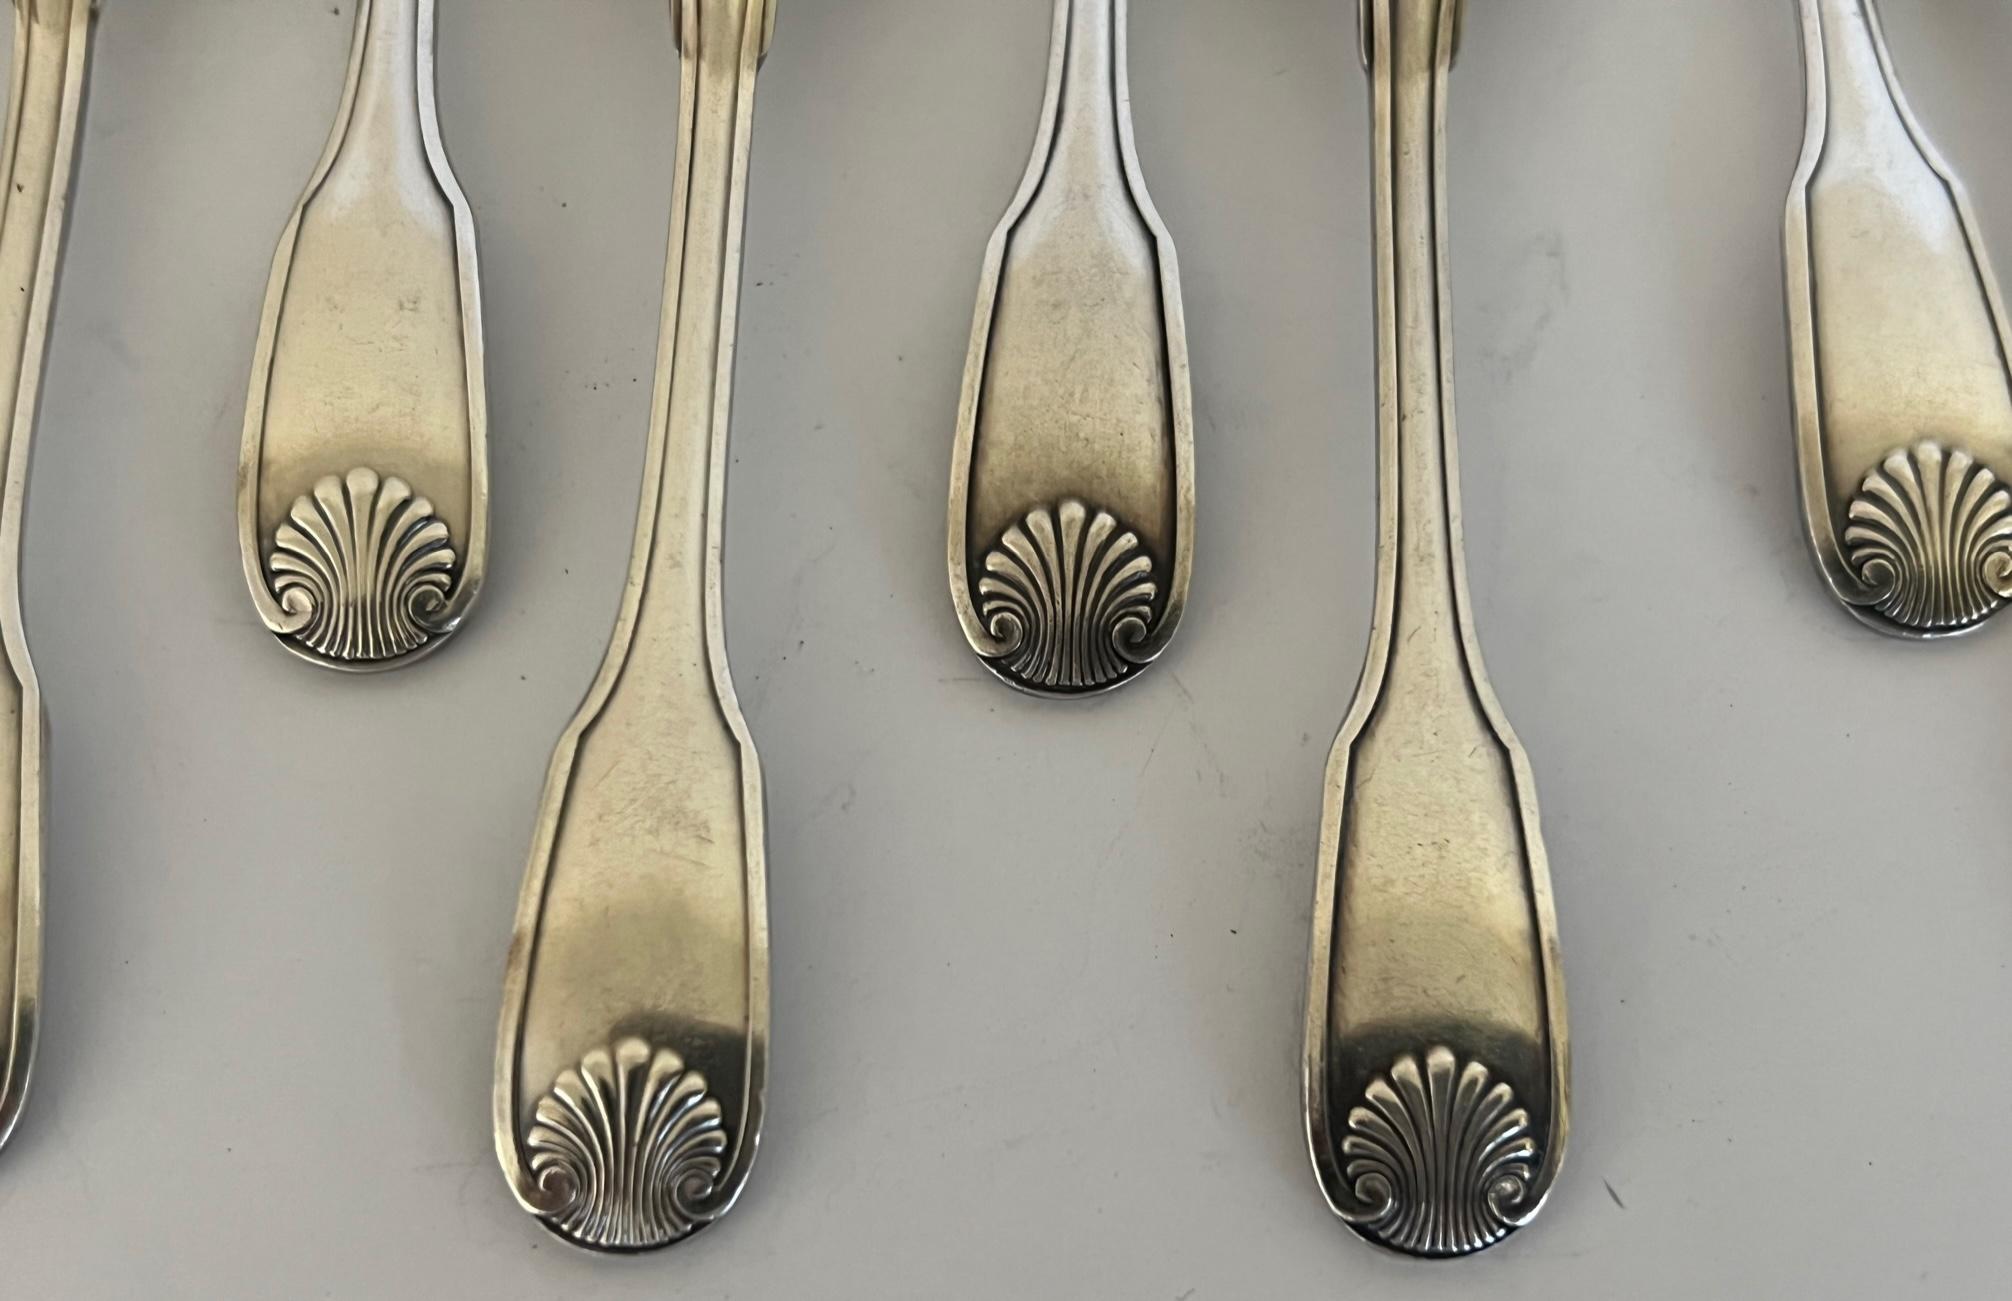 Christofle Demitasse Spoons in Vendome Pattern in Box- Set of 12 For Sale 2